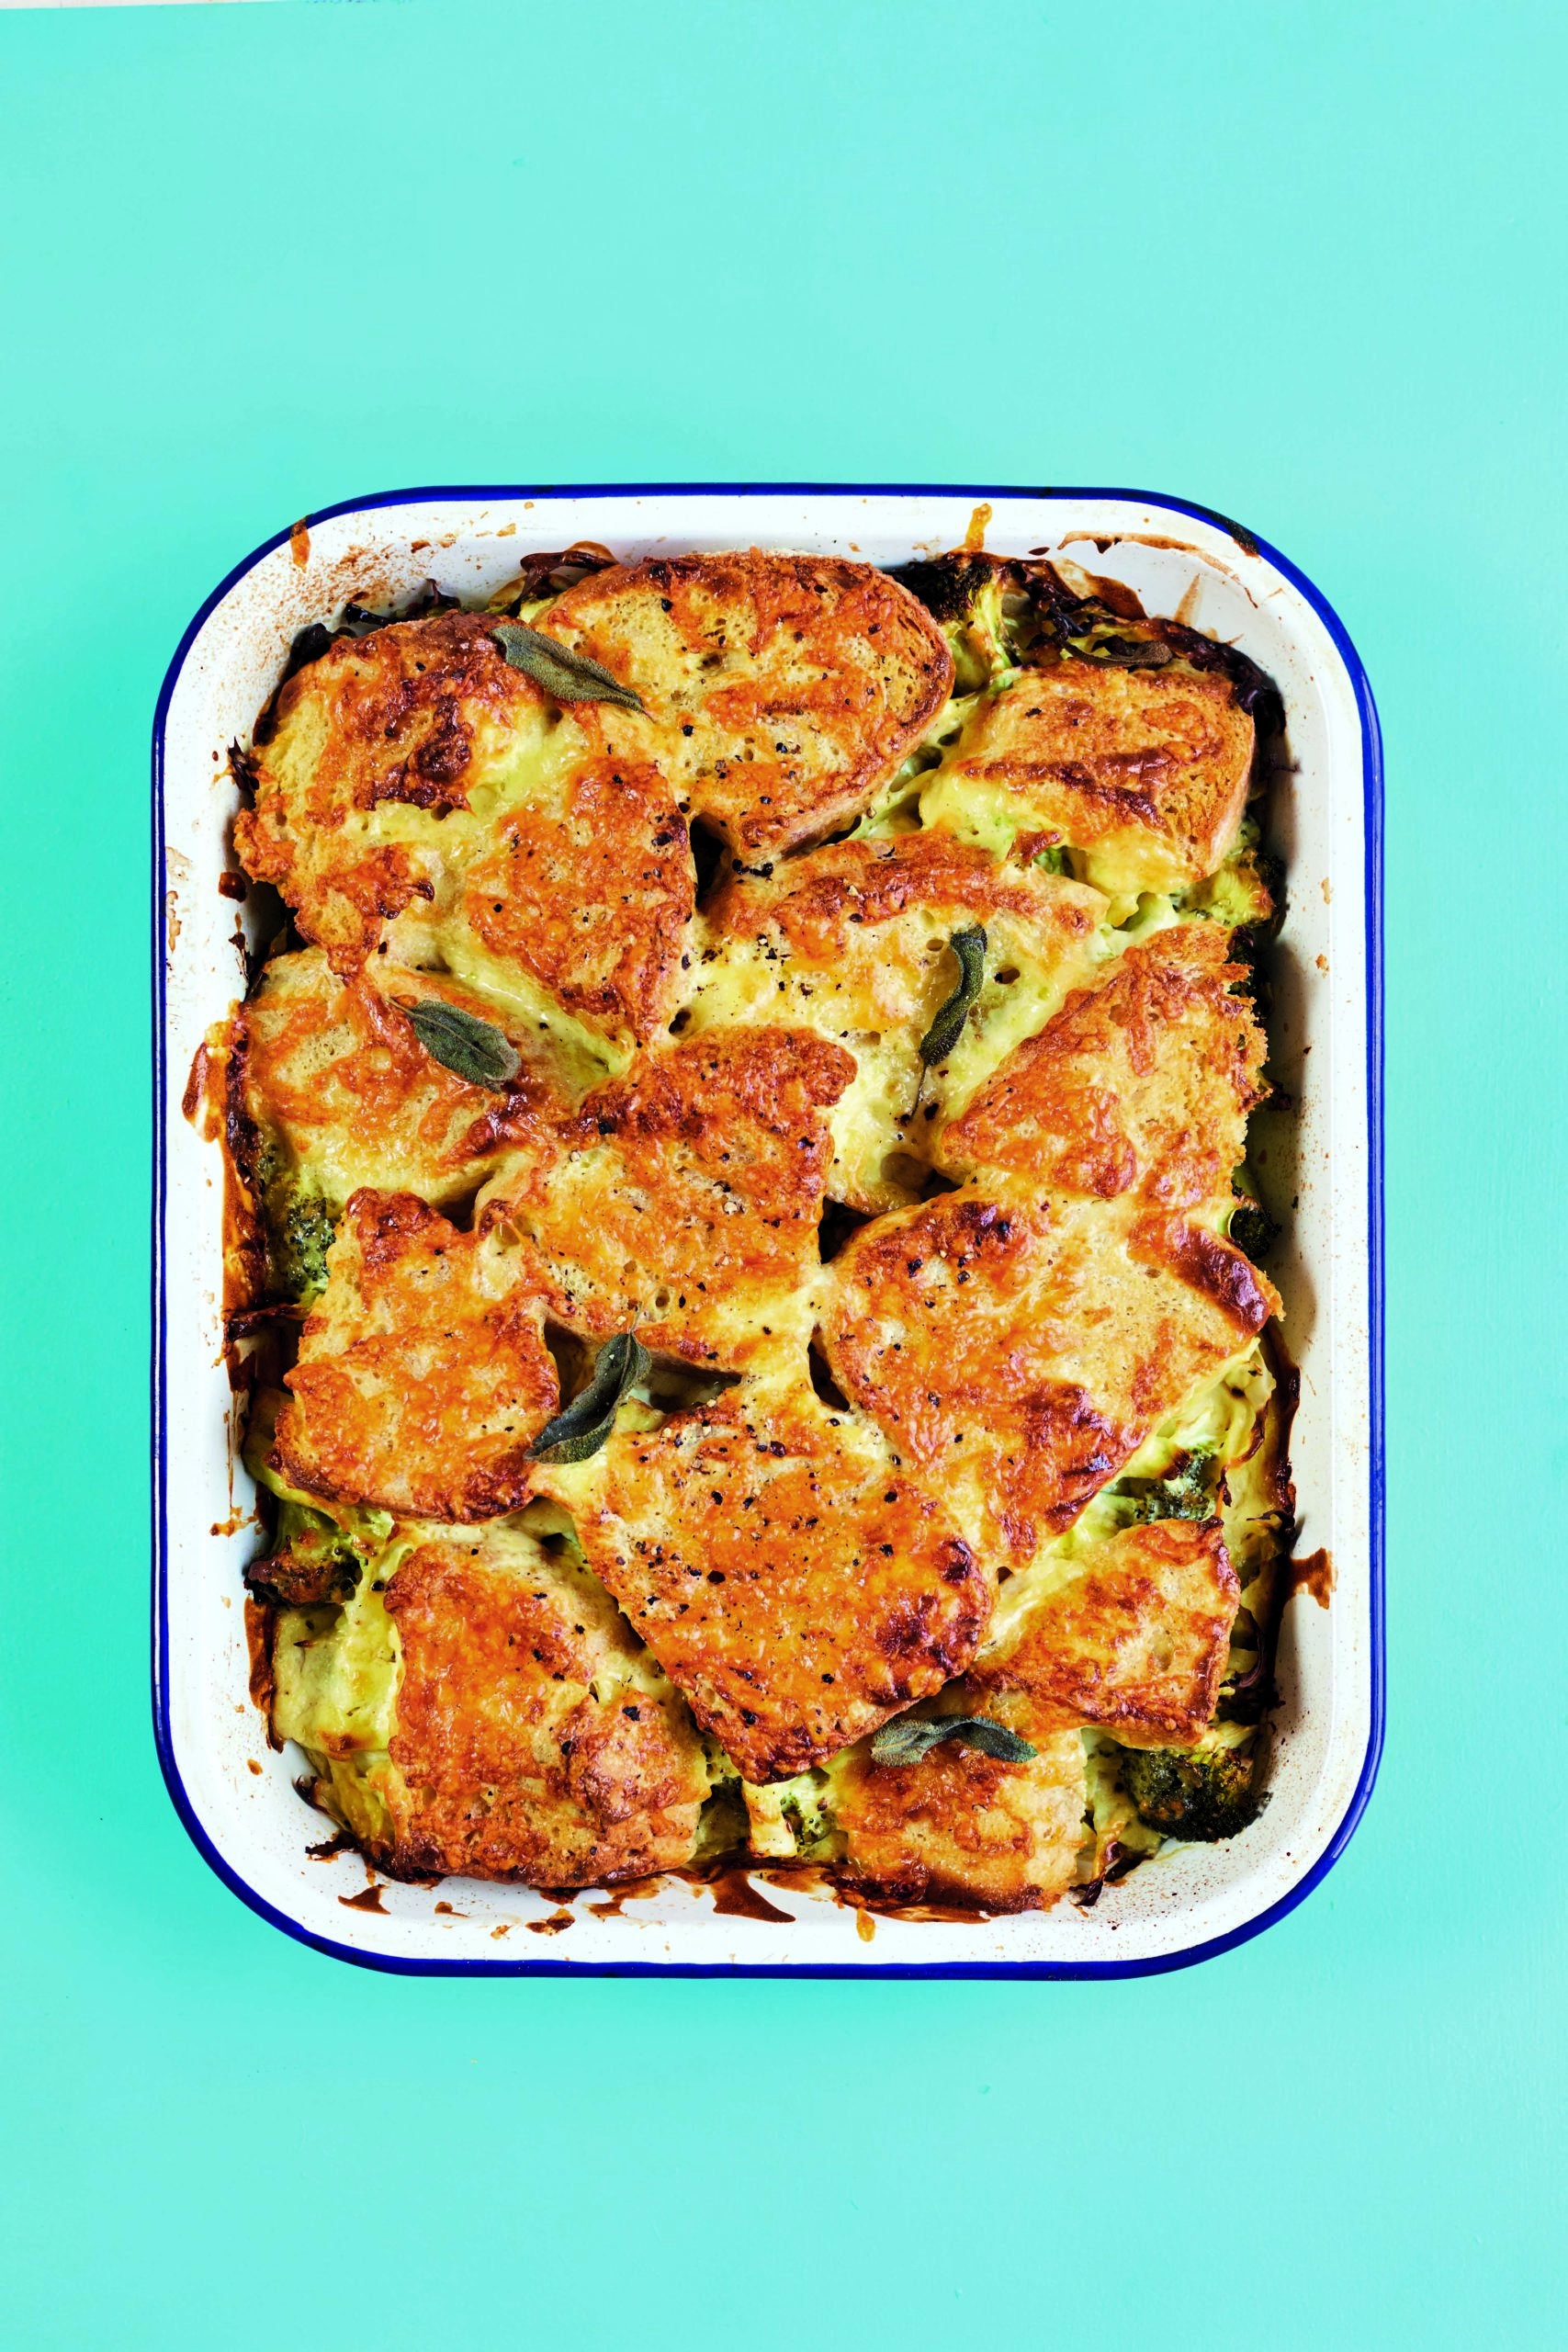 Crisp Cheddar-Topped Bread Cobbler With Chilli Spiked Greens